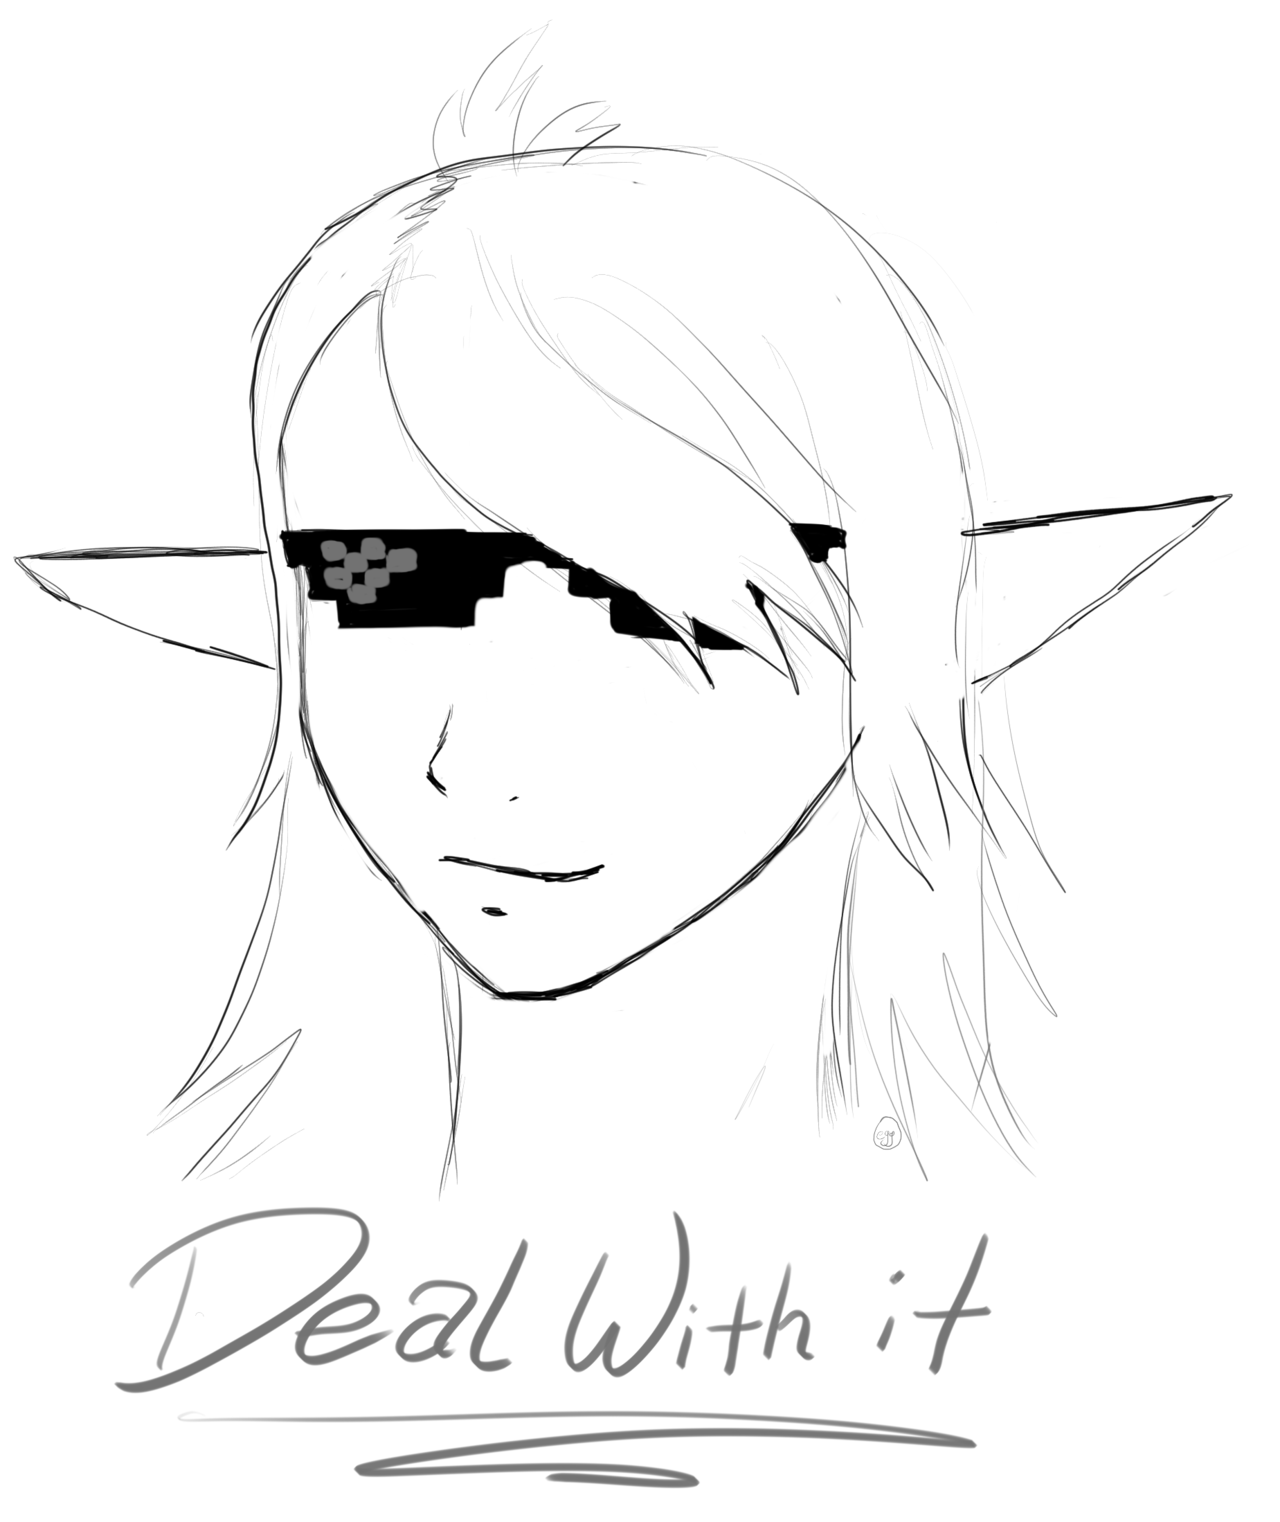 Deal With It by Zel